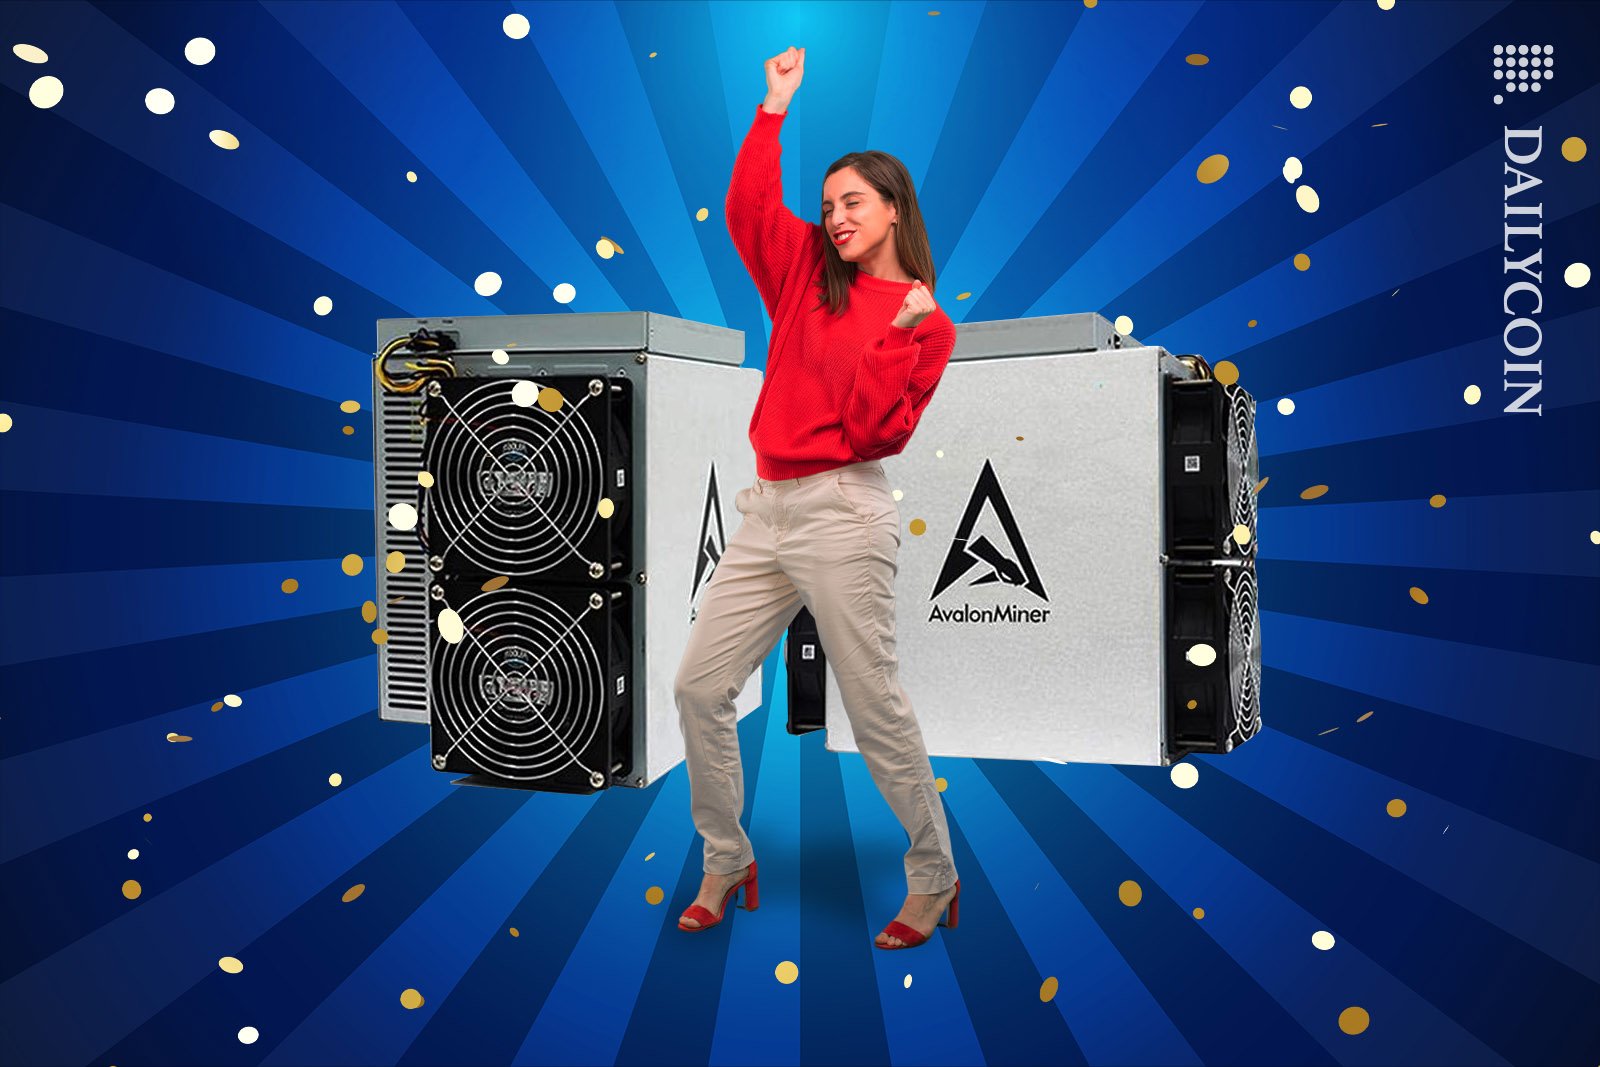 Happy woman celebrating the launch of a new bitcoin mining product.